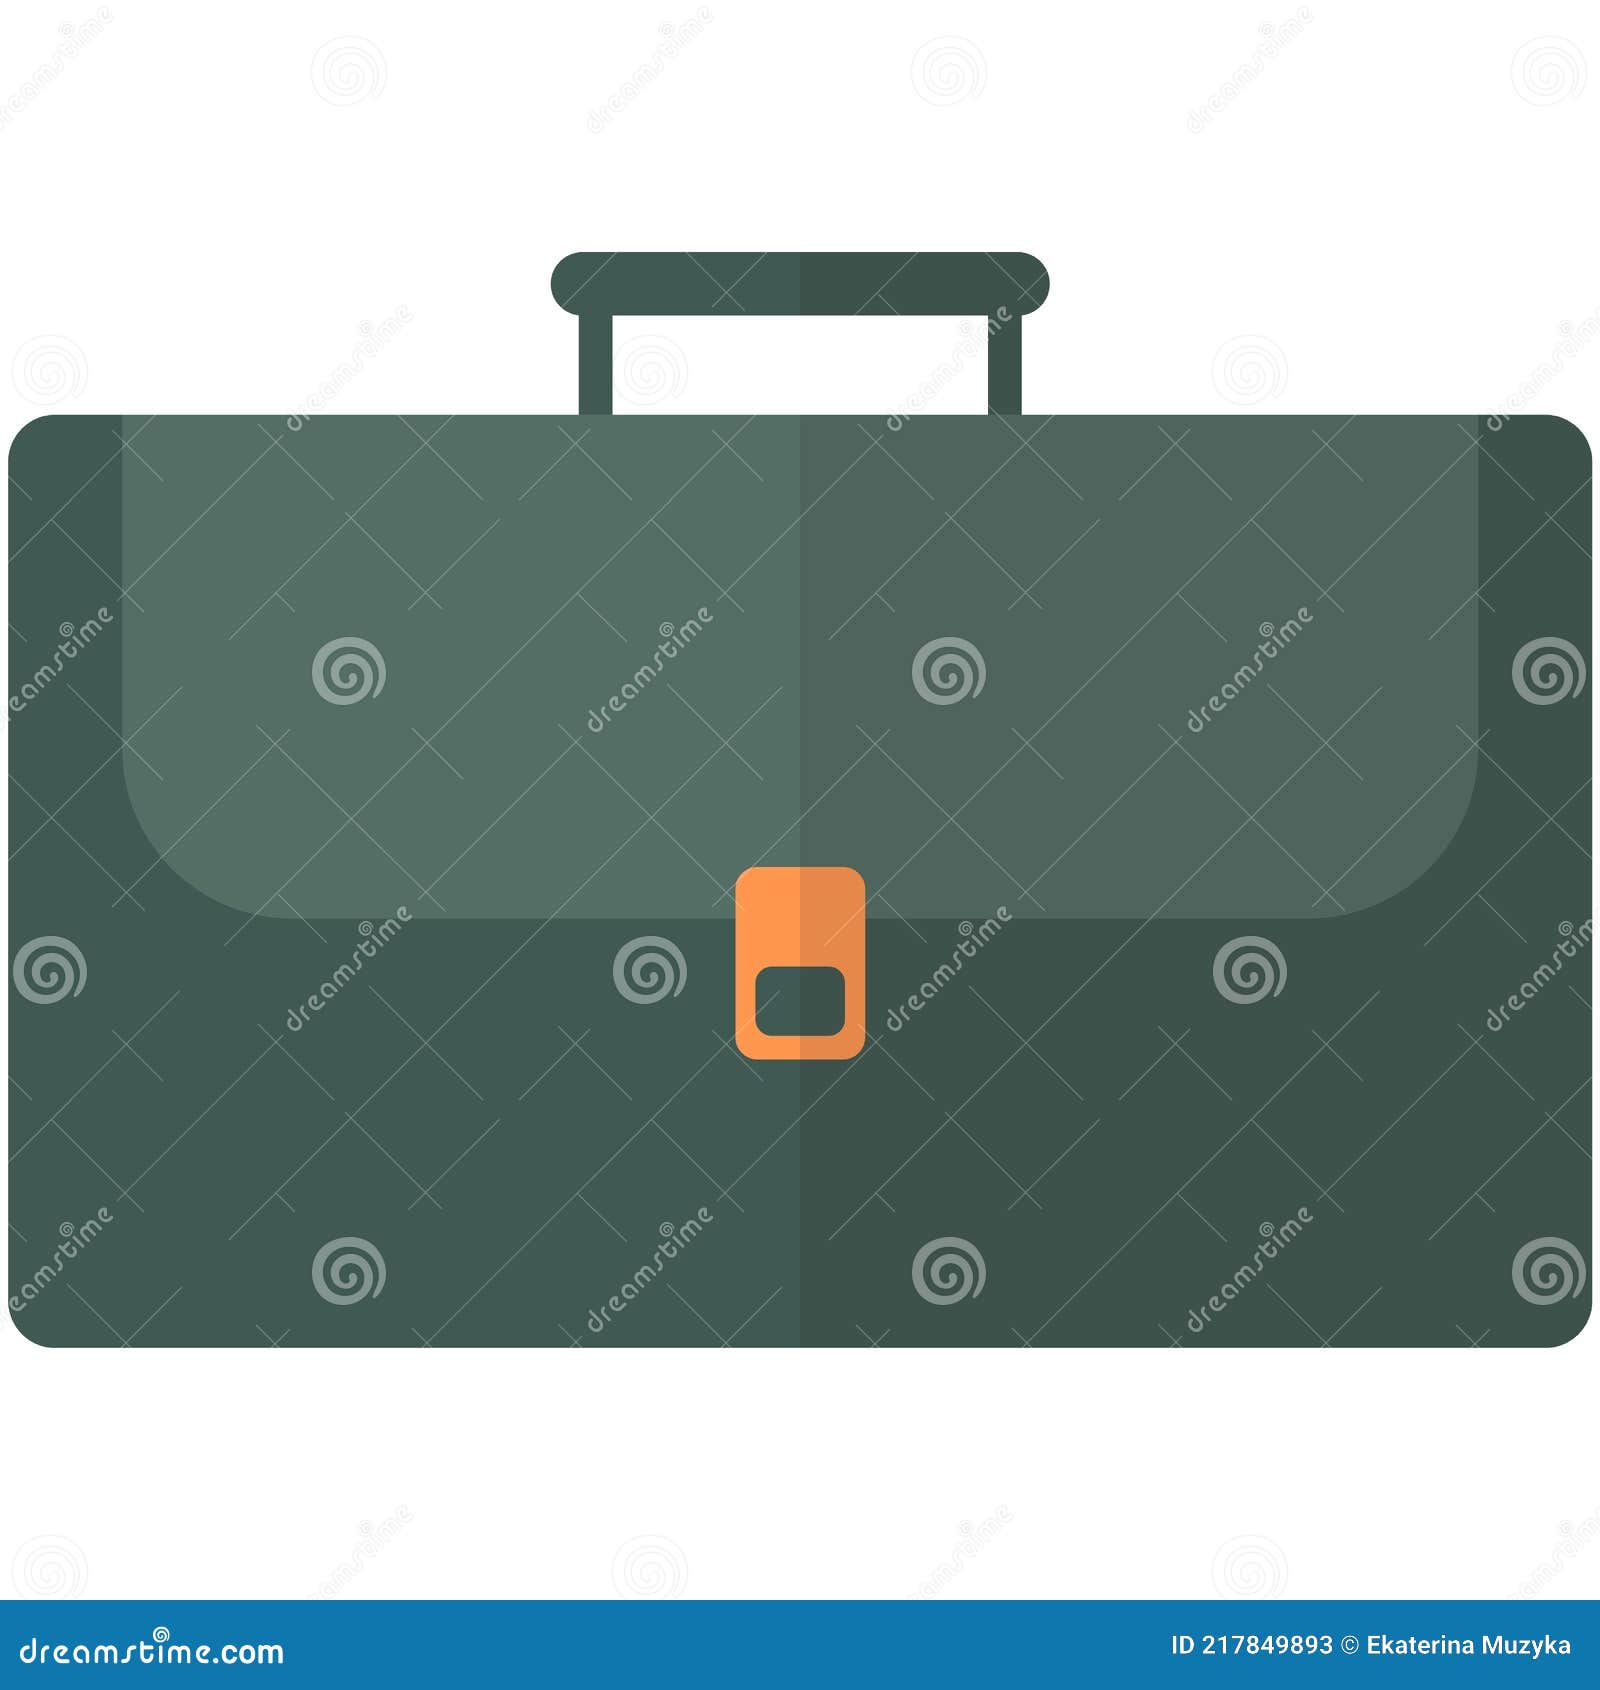 https://thumbs.dreamstime.com/z/briefcase-icon-vector-work-bag-business-case-white-isolated-job-suitcase-background-school-diplomat-illustration-217849893.jpg